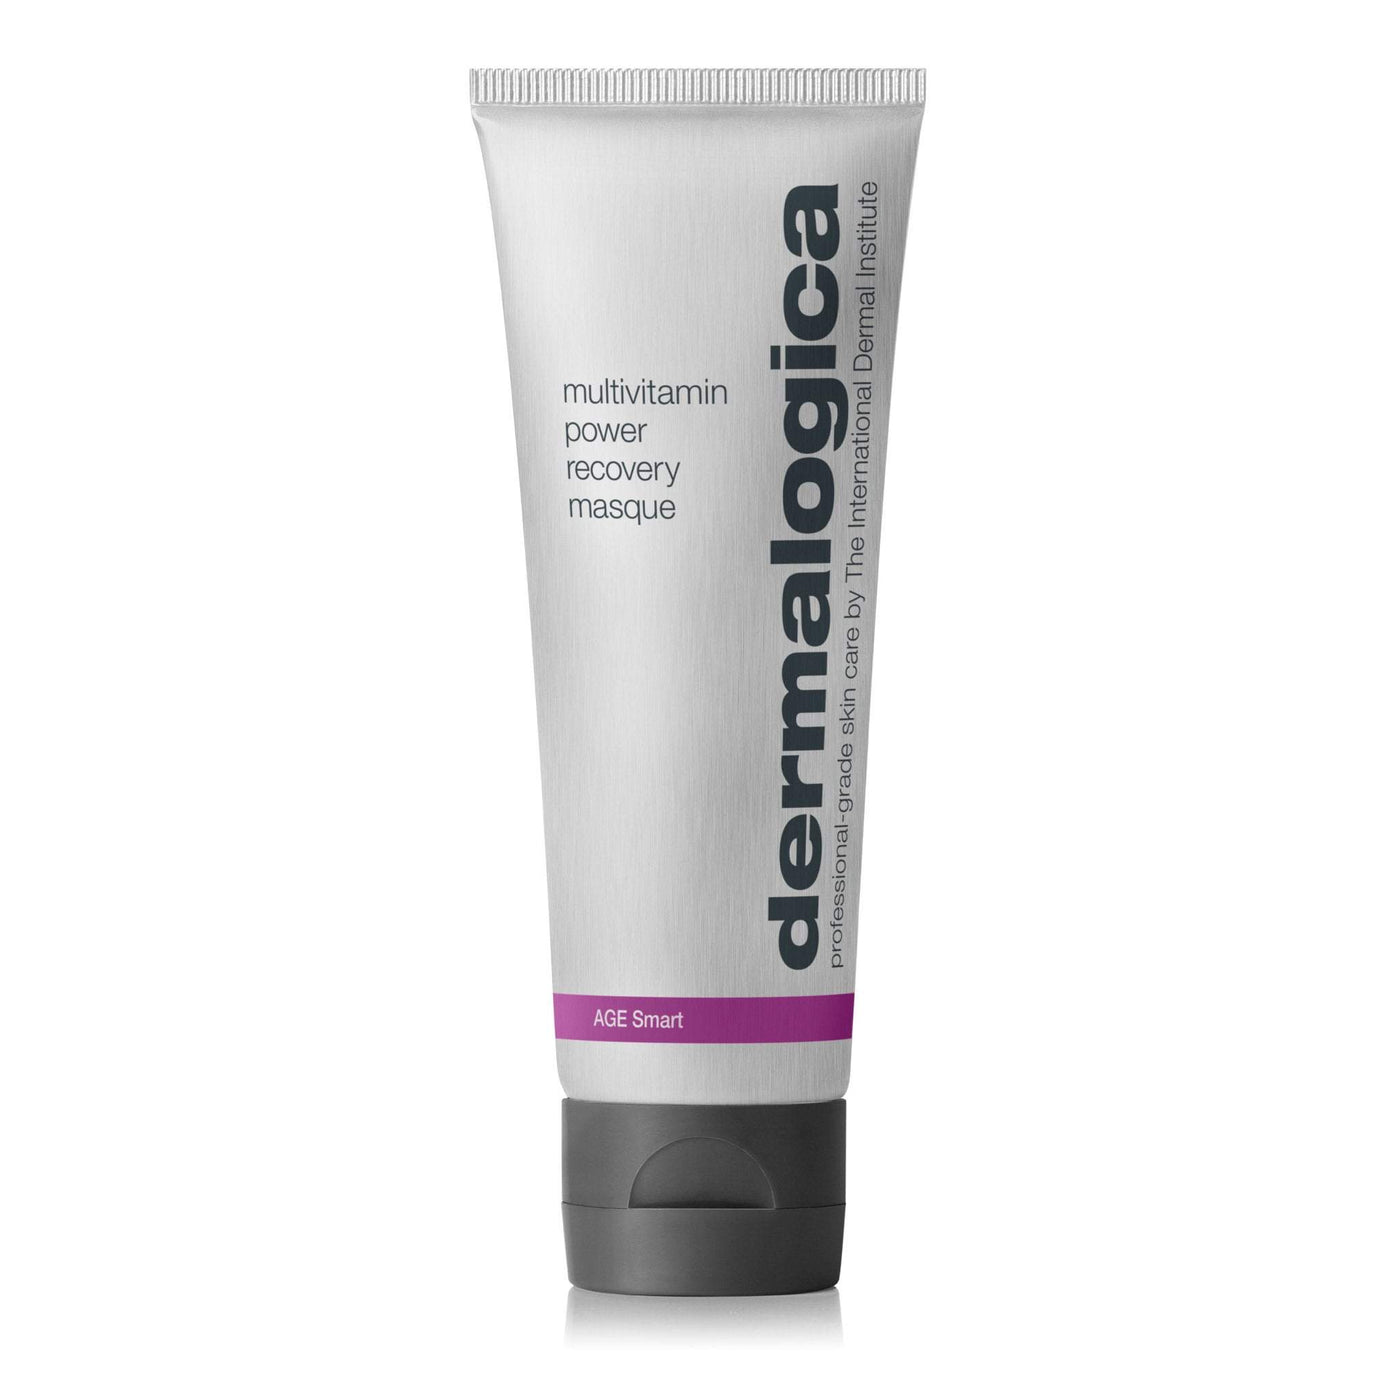 Age Smart-MultiVitamin Power Recovery Masque